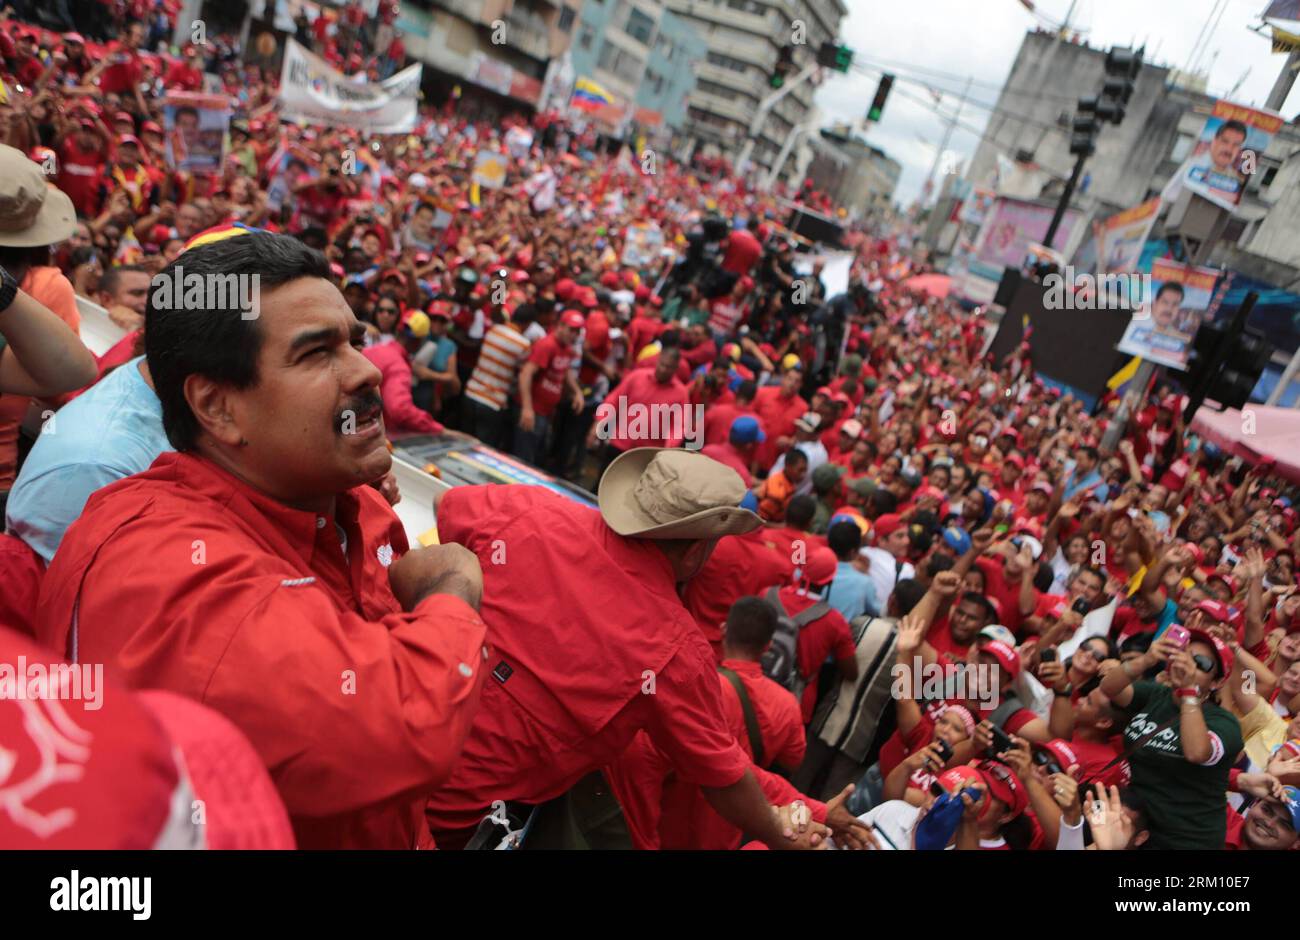 Bildnummer: 59486118  Datum: 08.04.2013  Copyright: imago/Xinhua MATURIN, April, 2013 - Image provided by Hugo Chavez Campaign Command shows Venezuelan Acting President and presidential candidate Nicolas Maduro (L) attending a campaign in Maturin, Monagas State, Venezuela, on April 8, 2013. Venezuela will held presidential elections on April 14. (Xinhua/Hugo Chavez Campaign Command) (da) VENEZUELA-POLITICS-ELECTIONS PUBLICATIONxNOTxINxCHN People Politik xcb x0x 2013 quer     59486118 Date 08 04 2013 Copyright Imago XINHUA Maturin April 2013 Image provided by Hugo Chavez Campaign Command Shows Stock Photo